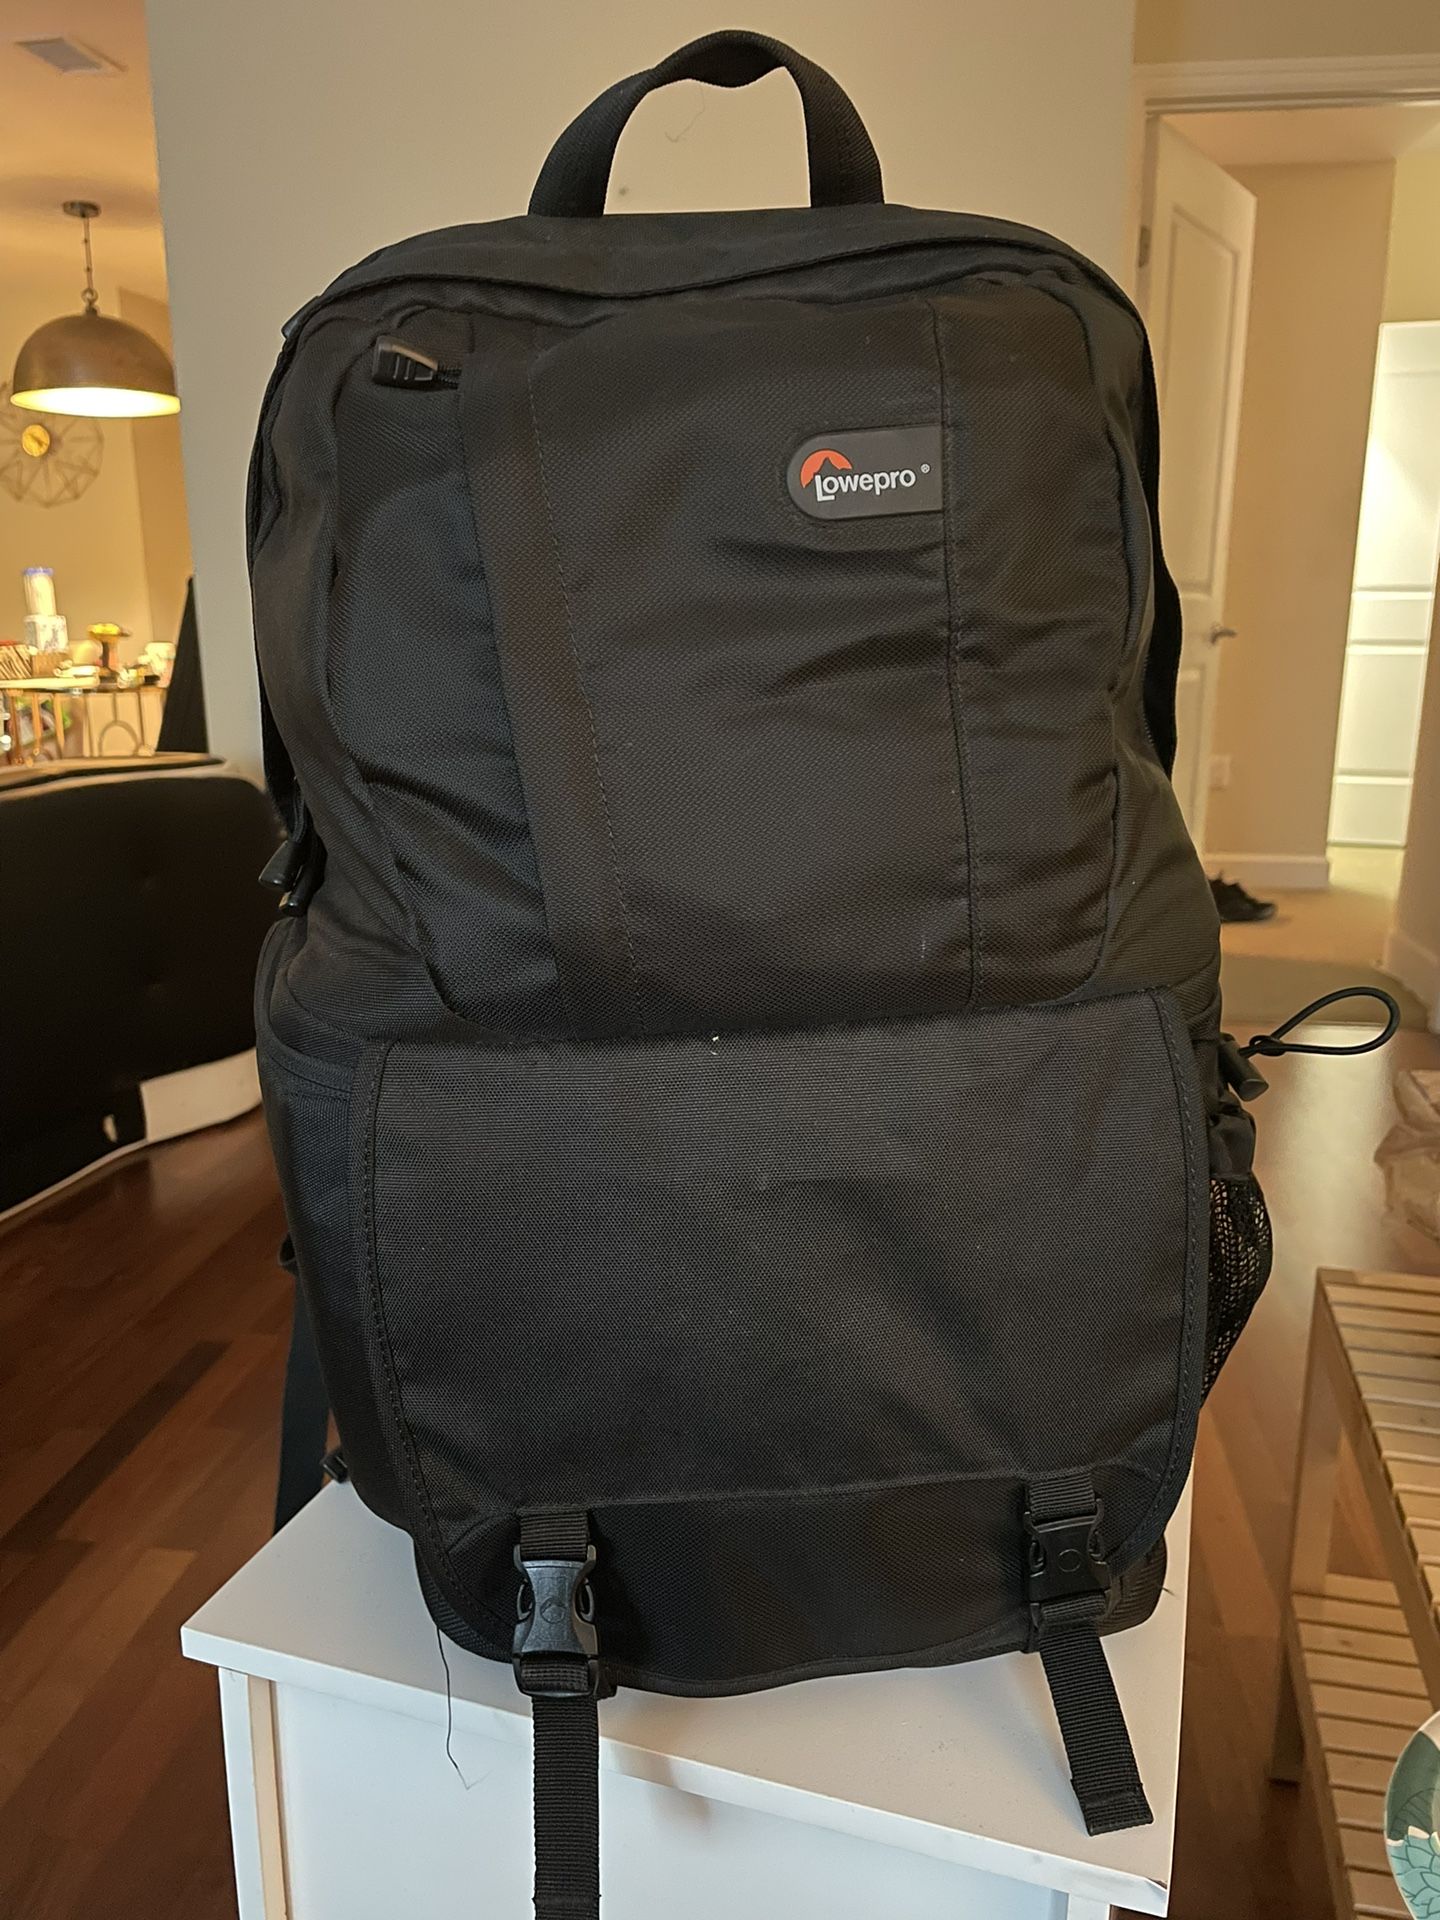 Lowepro Backpack With Canon Equipment 